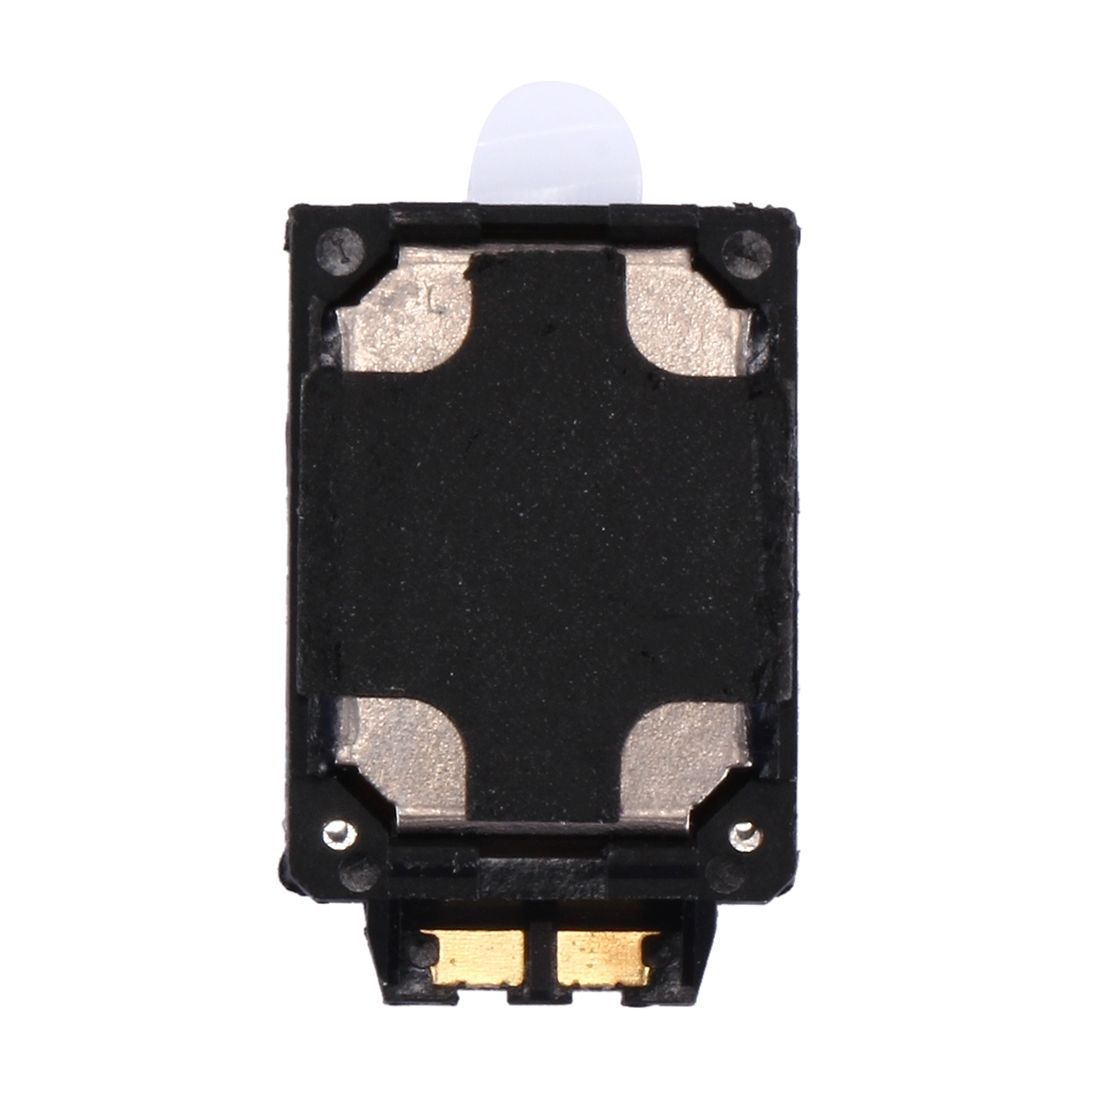 Samsung Galaxy J3 2016 Replacement Loudspeaker Buzzer for [product_price] - First Help Tech